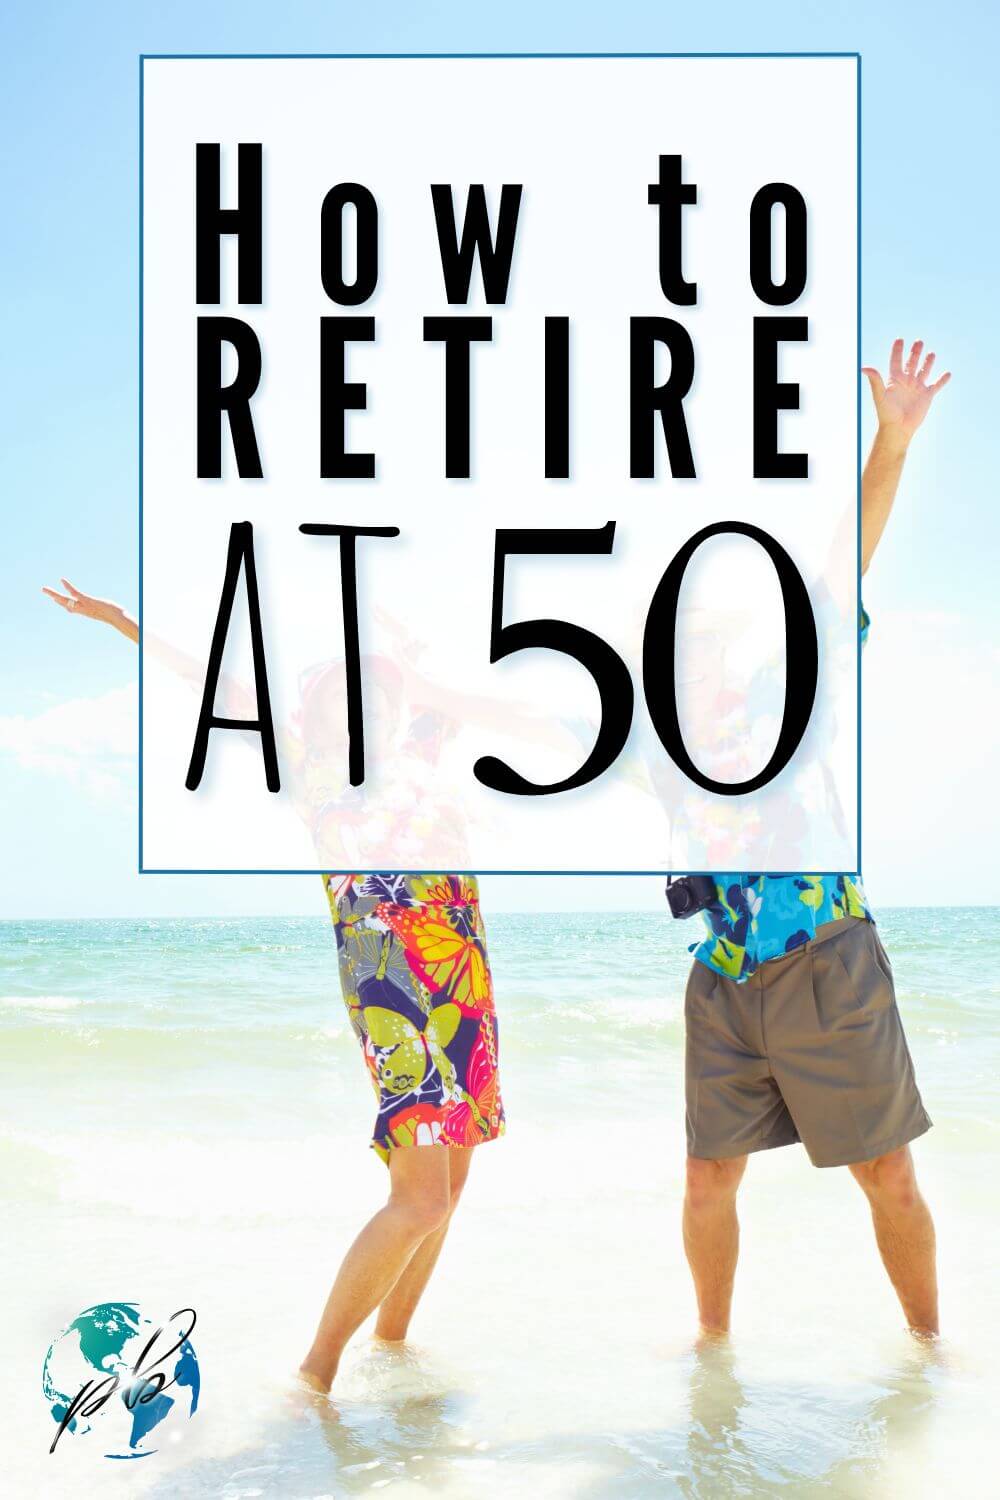 How to retire at 50 3